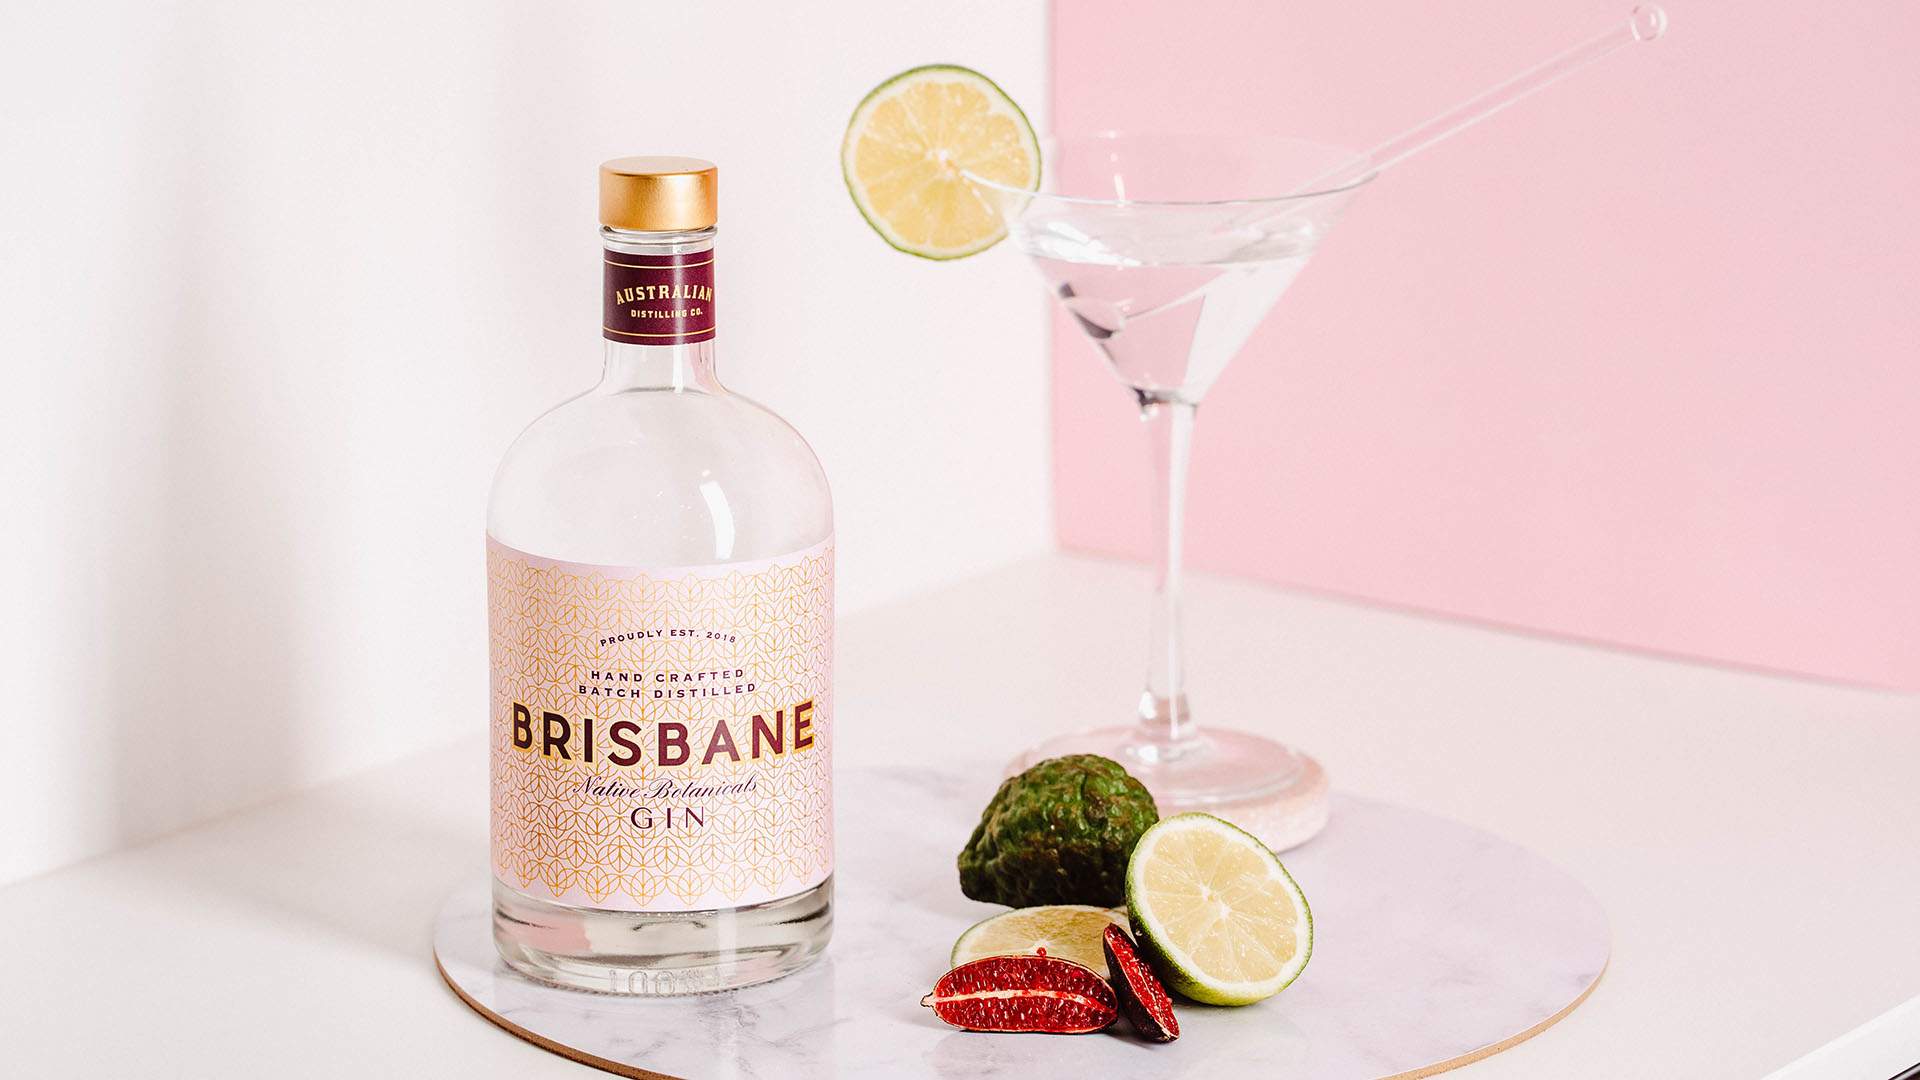 Brisbane Now Has Its Own Gin So You Can Sip Cocktails While Celebrating the City